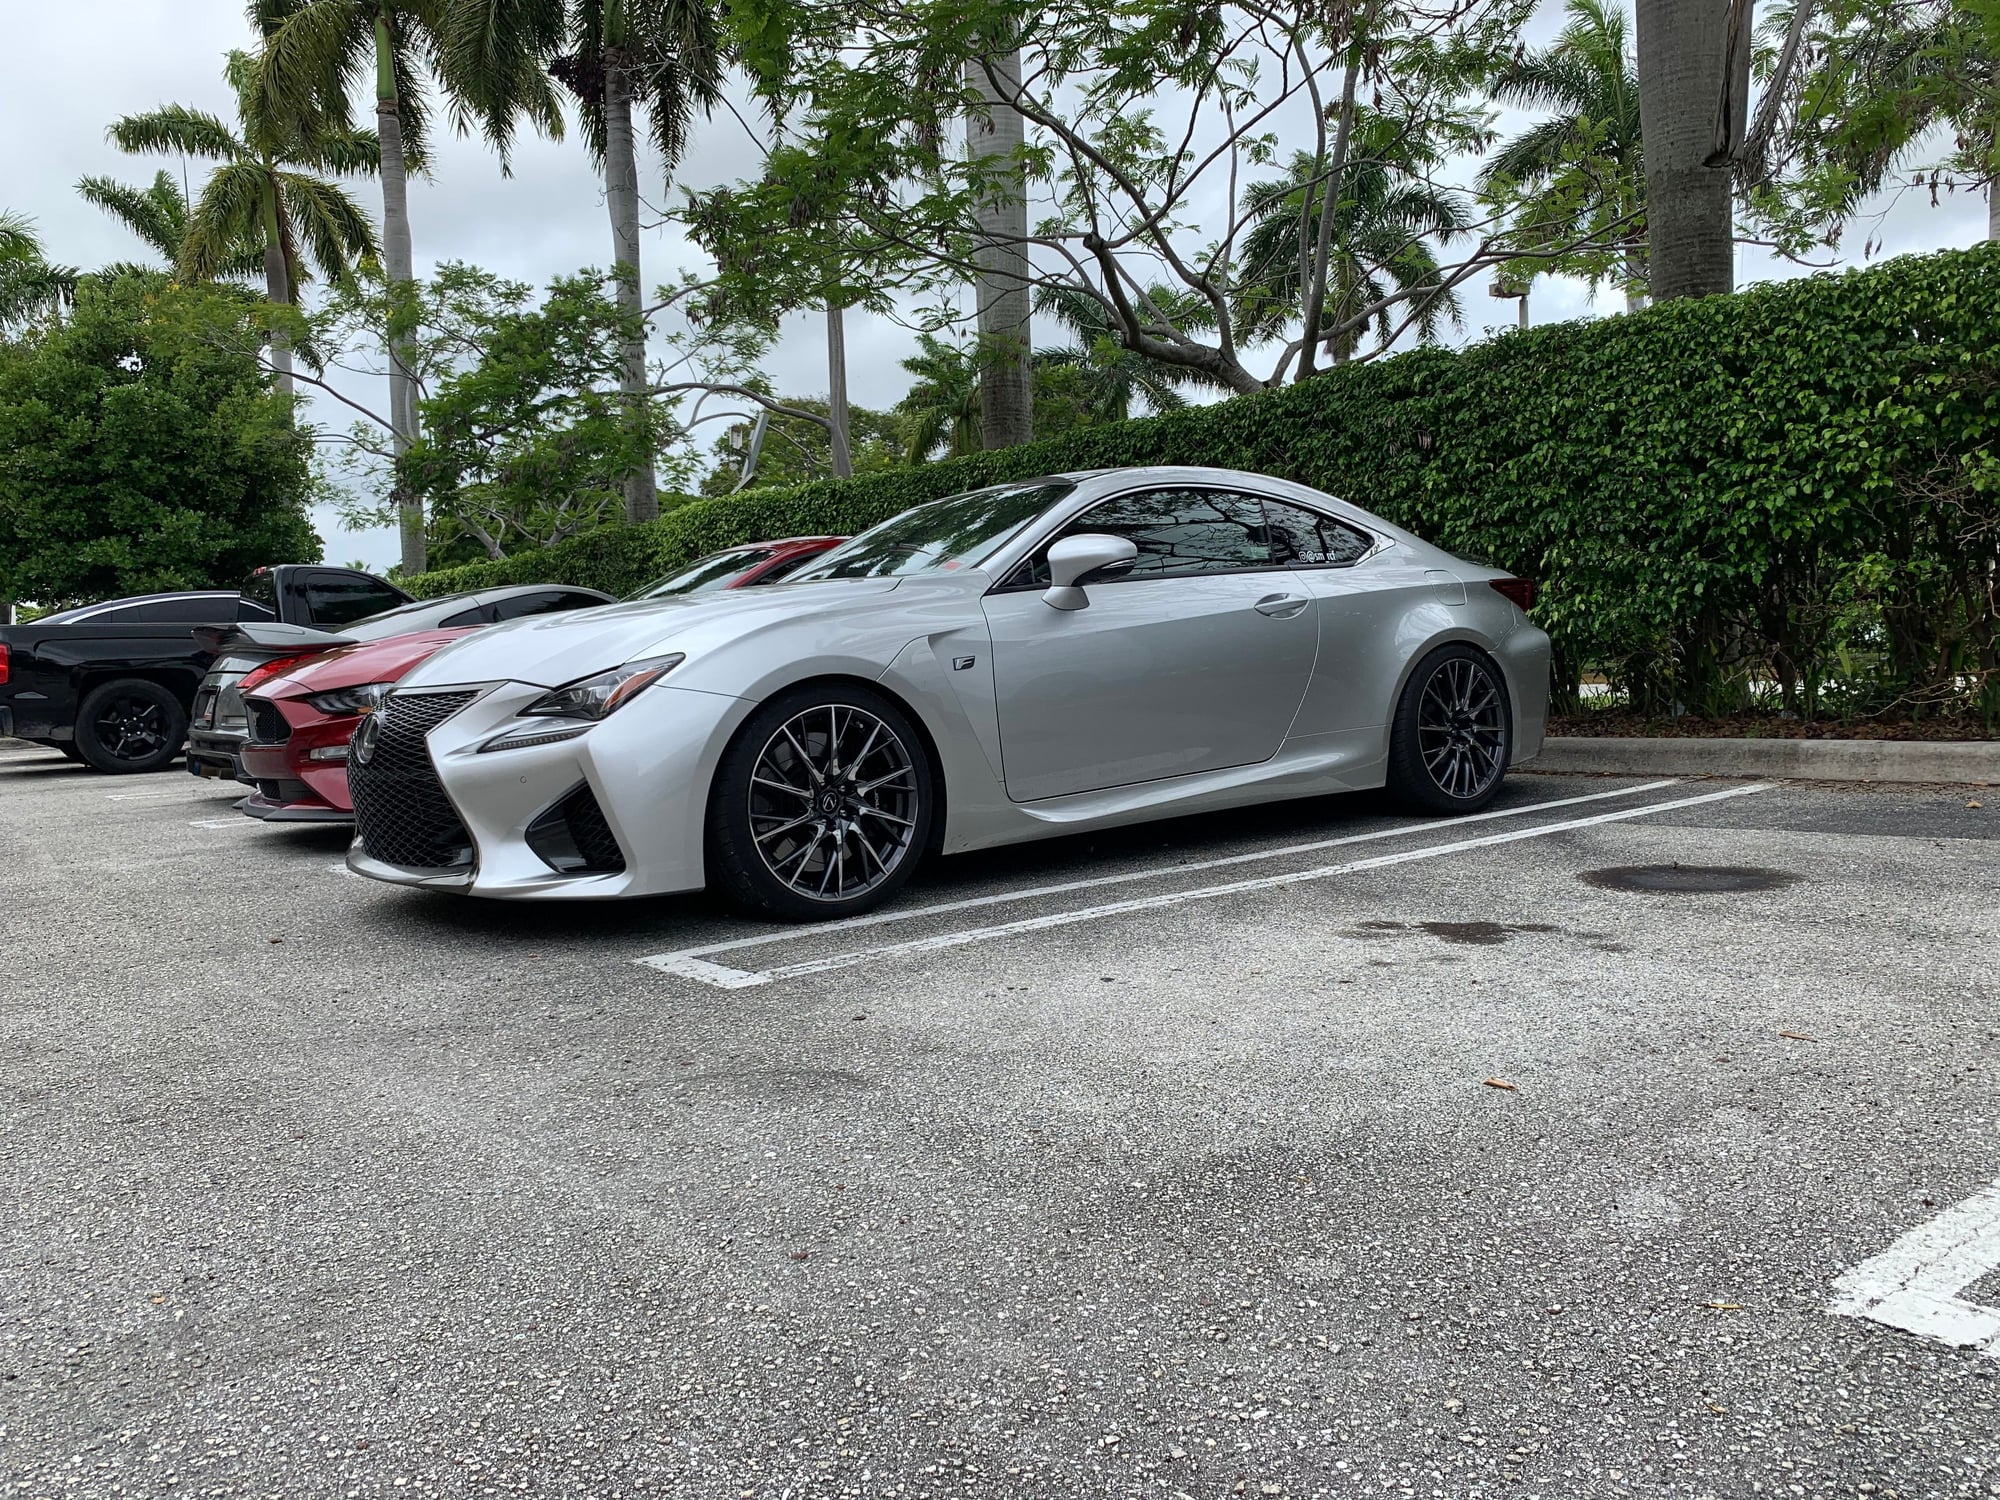 2015 Lexus RC F - CPO Second owner 2015 LEXUS RCF Clean title - Used - VIN JTHHP5BC0F5003851 - 18,000 Miles - 8 cyl - 2WD - Automatic - Coupe - Silver - West Palm Beach, FL 33411, United States